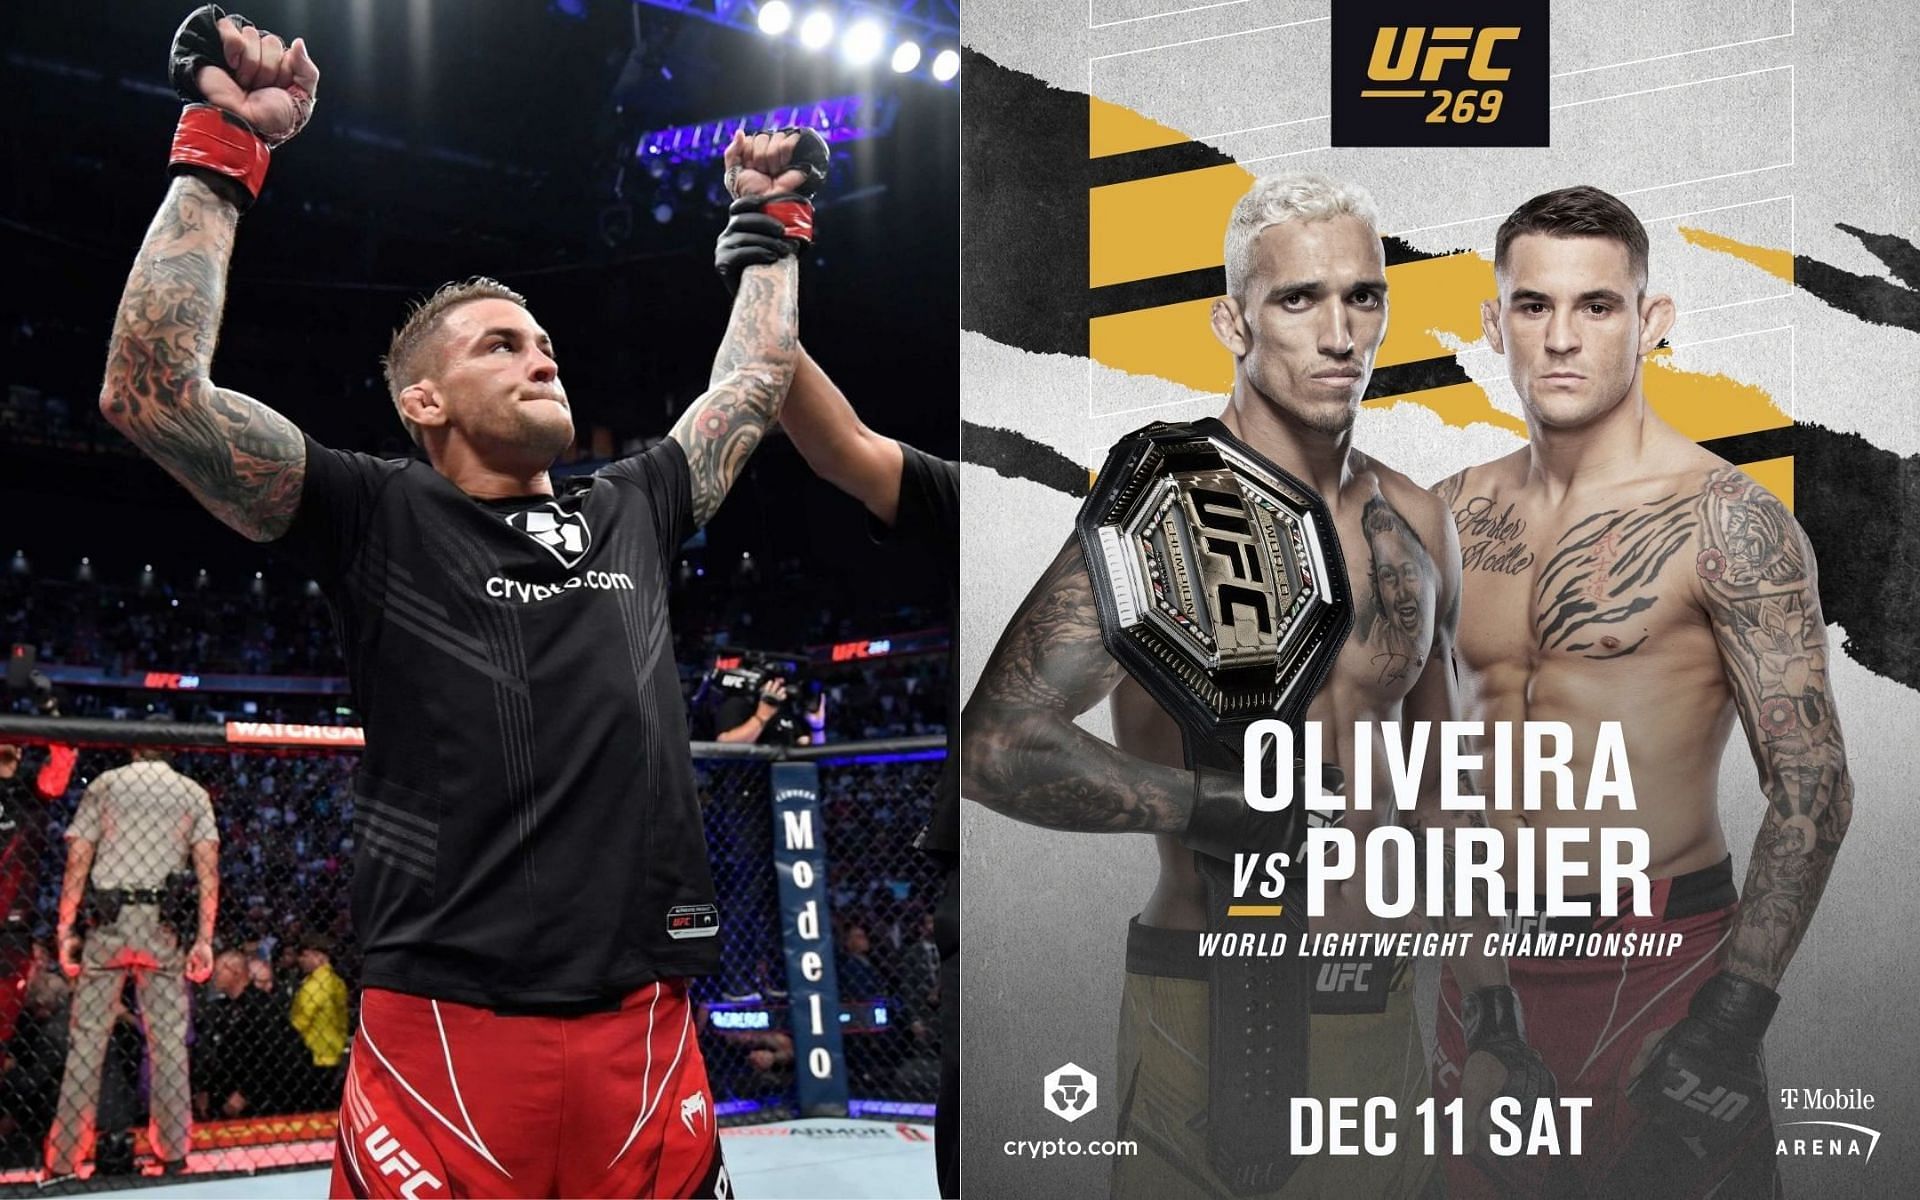 UFC 269 will be headlined by a lightweight title fight between Dustin Poirier and Charles Oliveira [Image credits: @ufc and @dustinpoirier on Instagram]